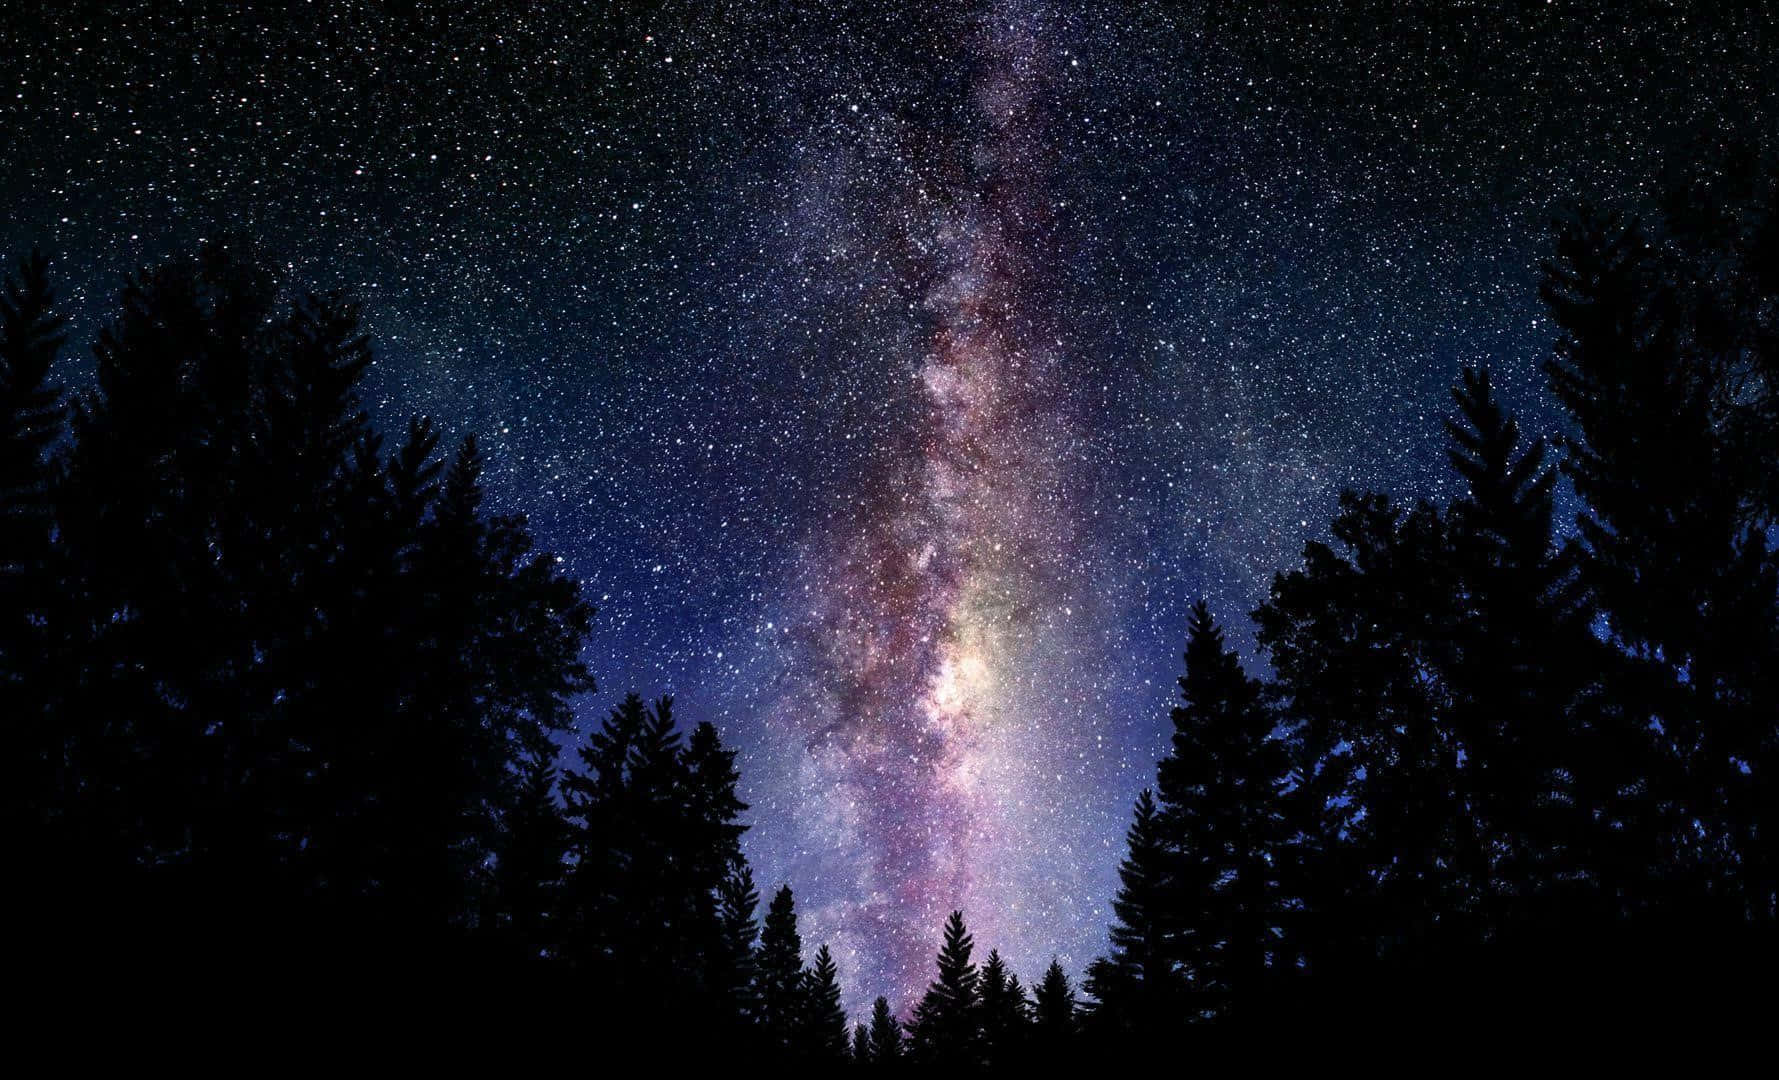 Enjoy the never ending beauty of the Milky Way